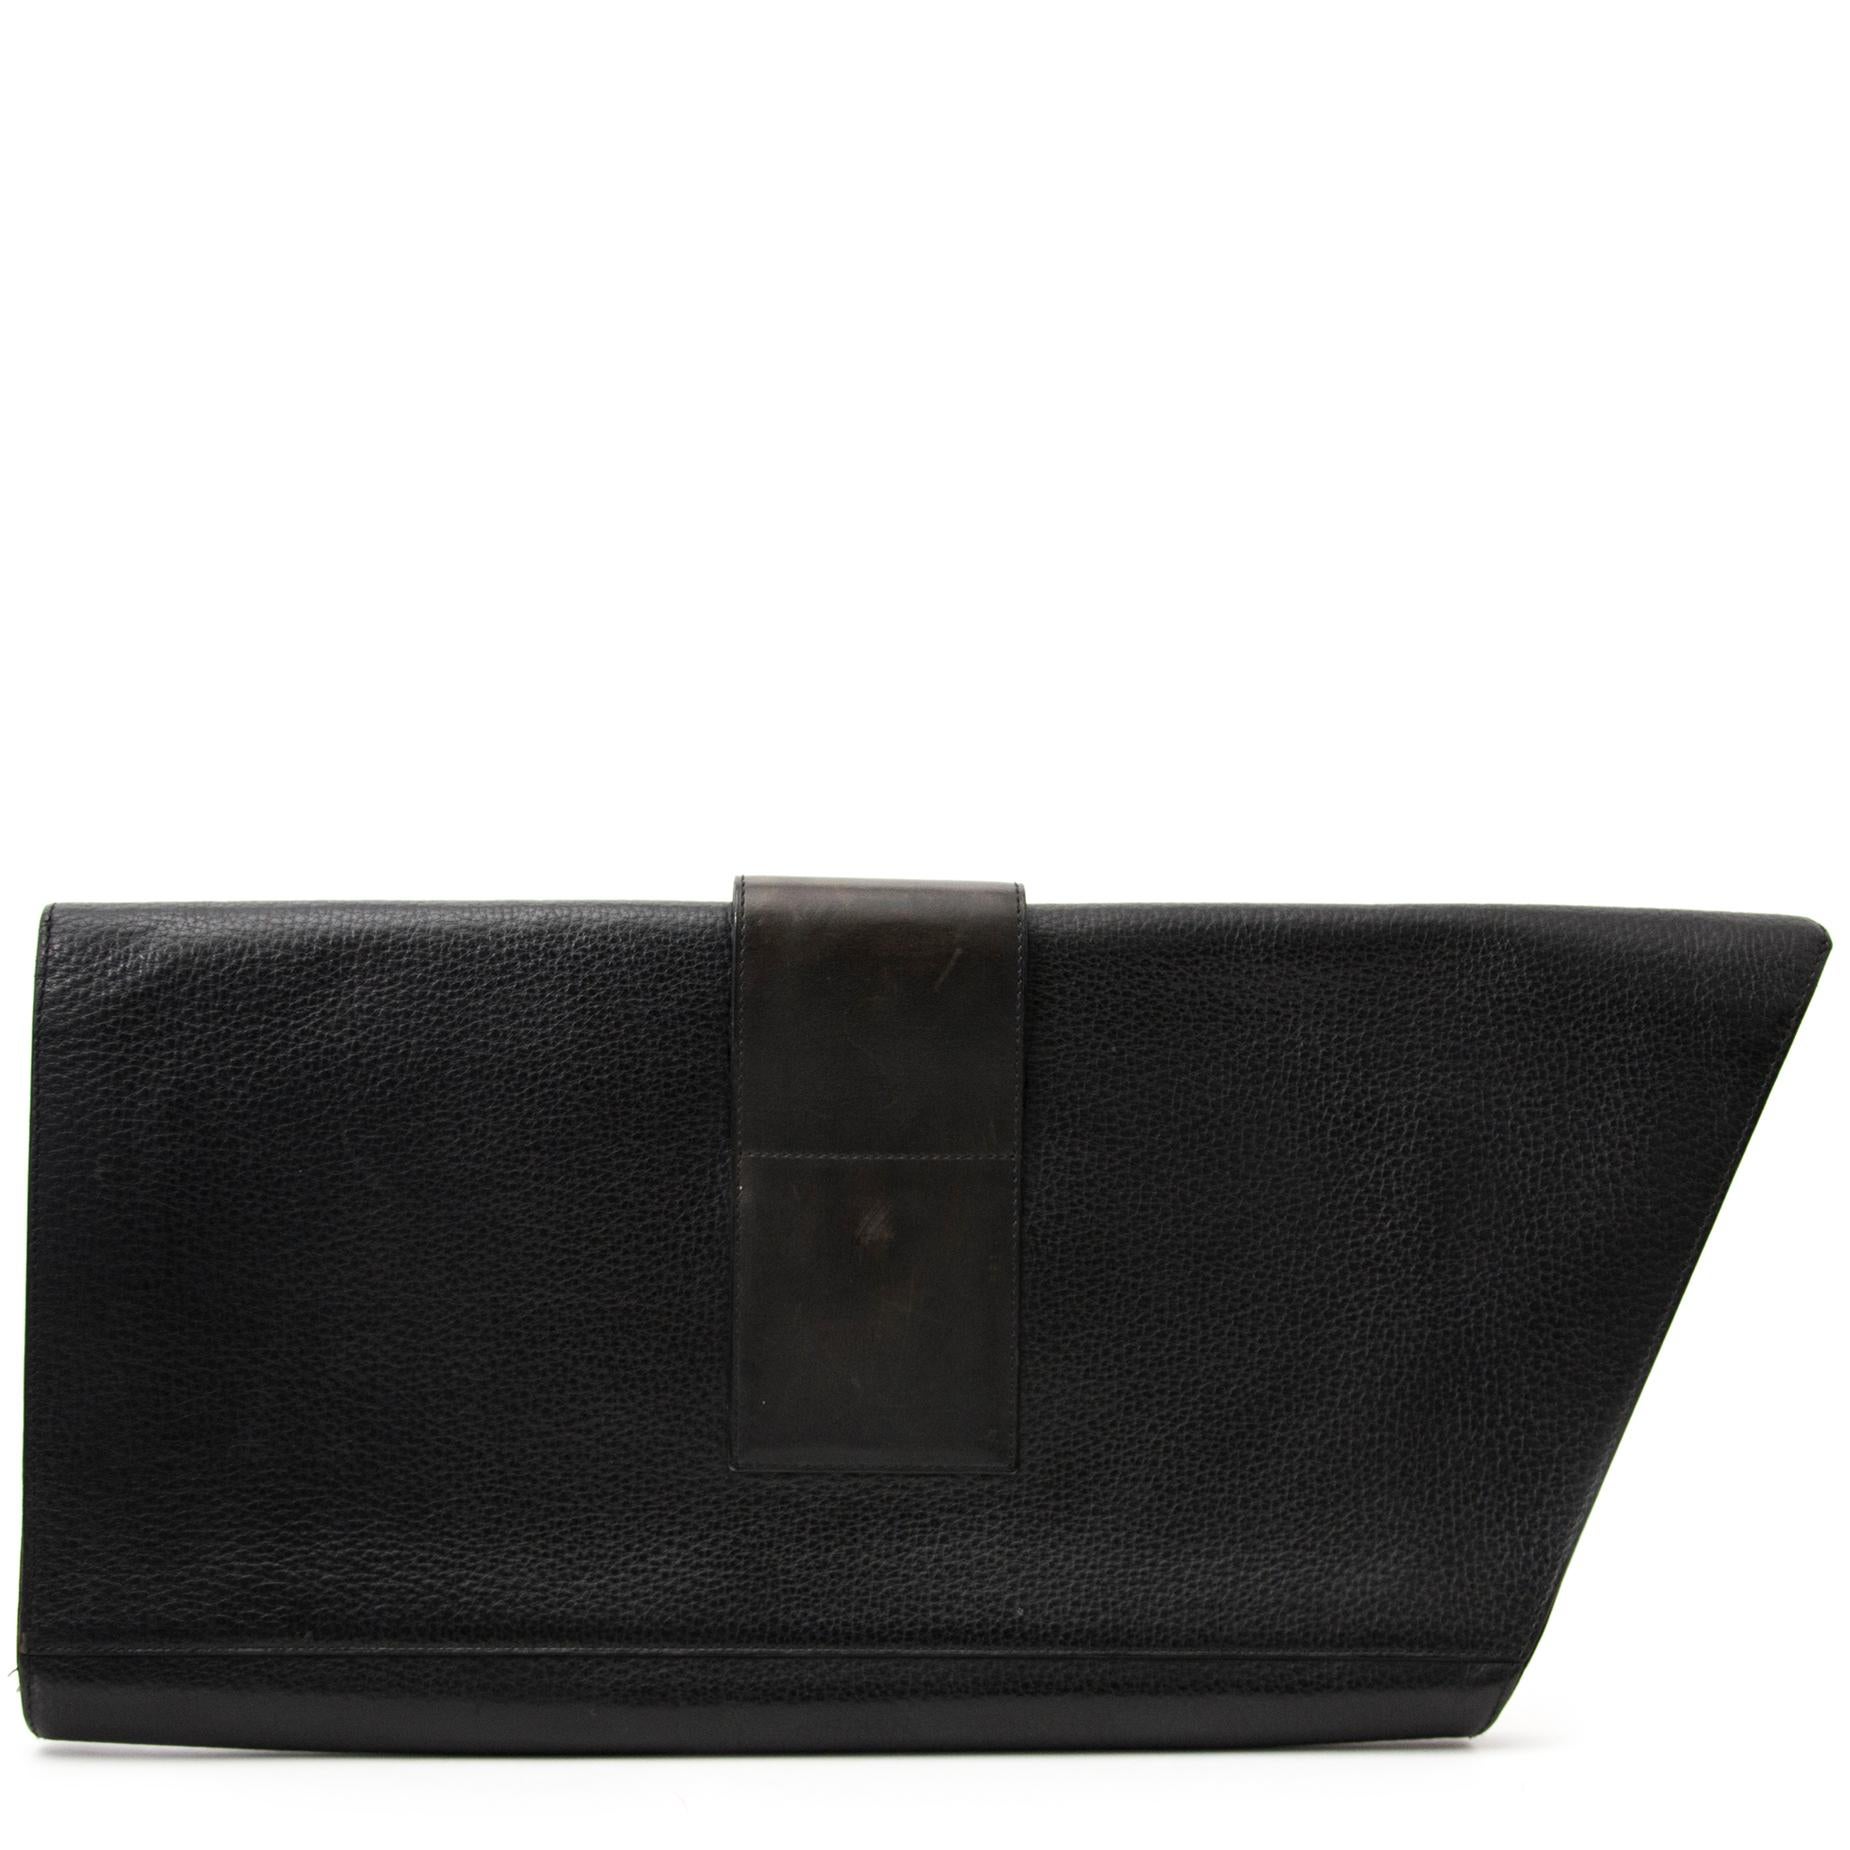 Good Preloved Condition

Delvaux Black Large Clutch

This Delvaux clutch is the perfect day to night clutch due to its elegant shape and spacious interior. 
Crafted out of grained leather with gold-tone details.

The interior has 2 seperate